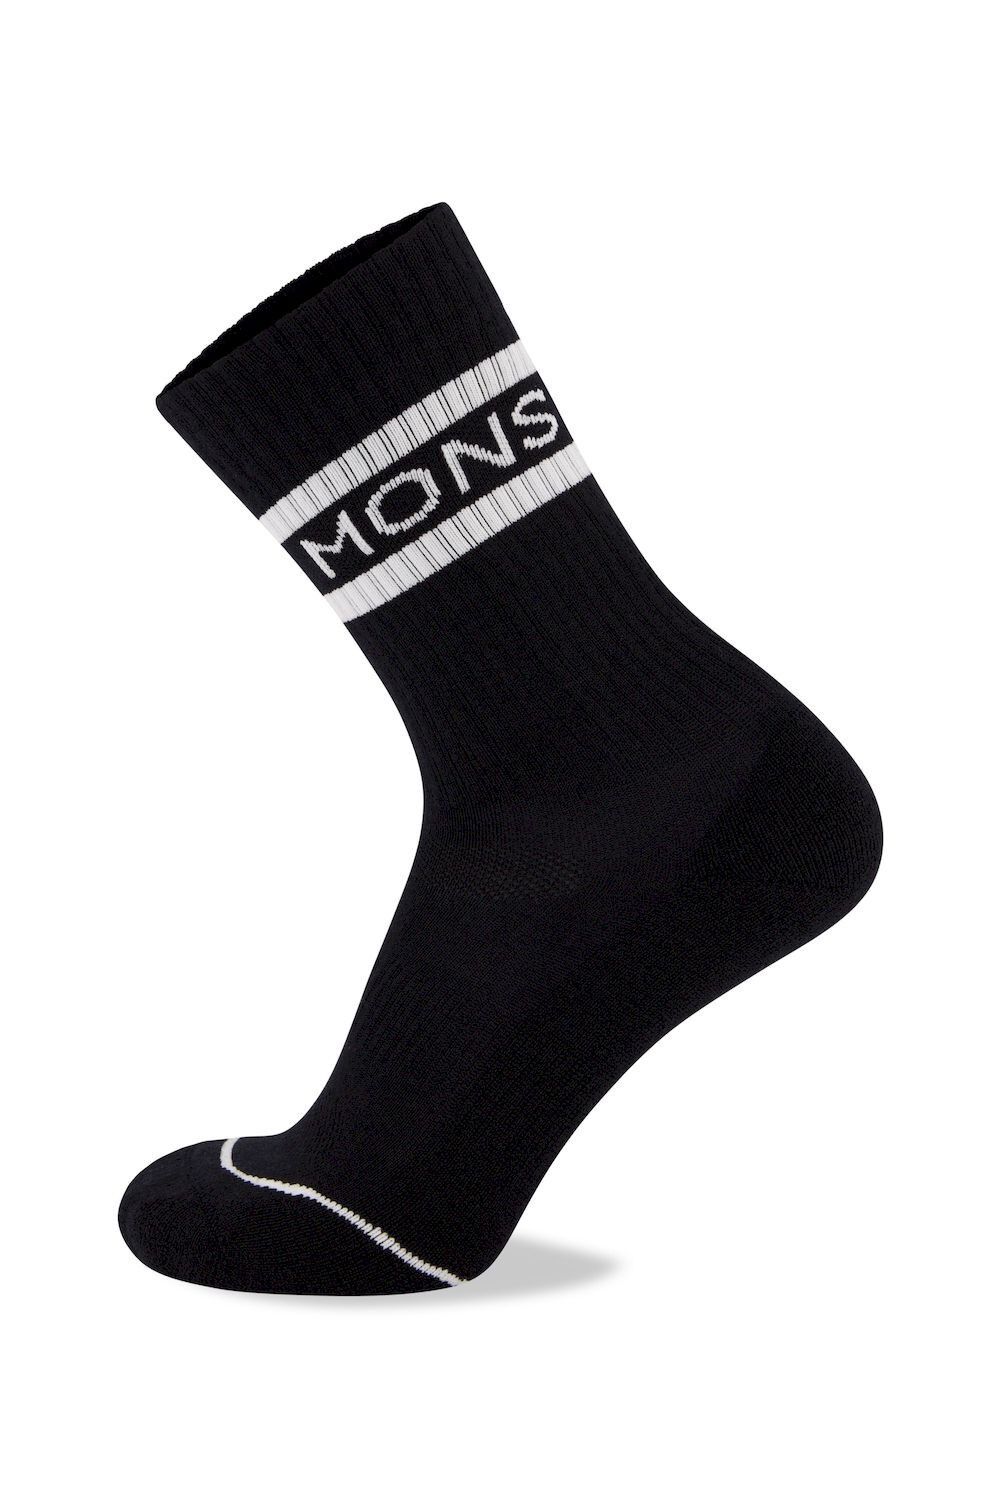 Mons Royale Signature Crew Sock - Calcetines ciclismo